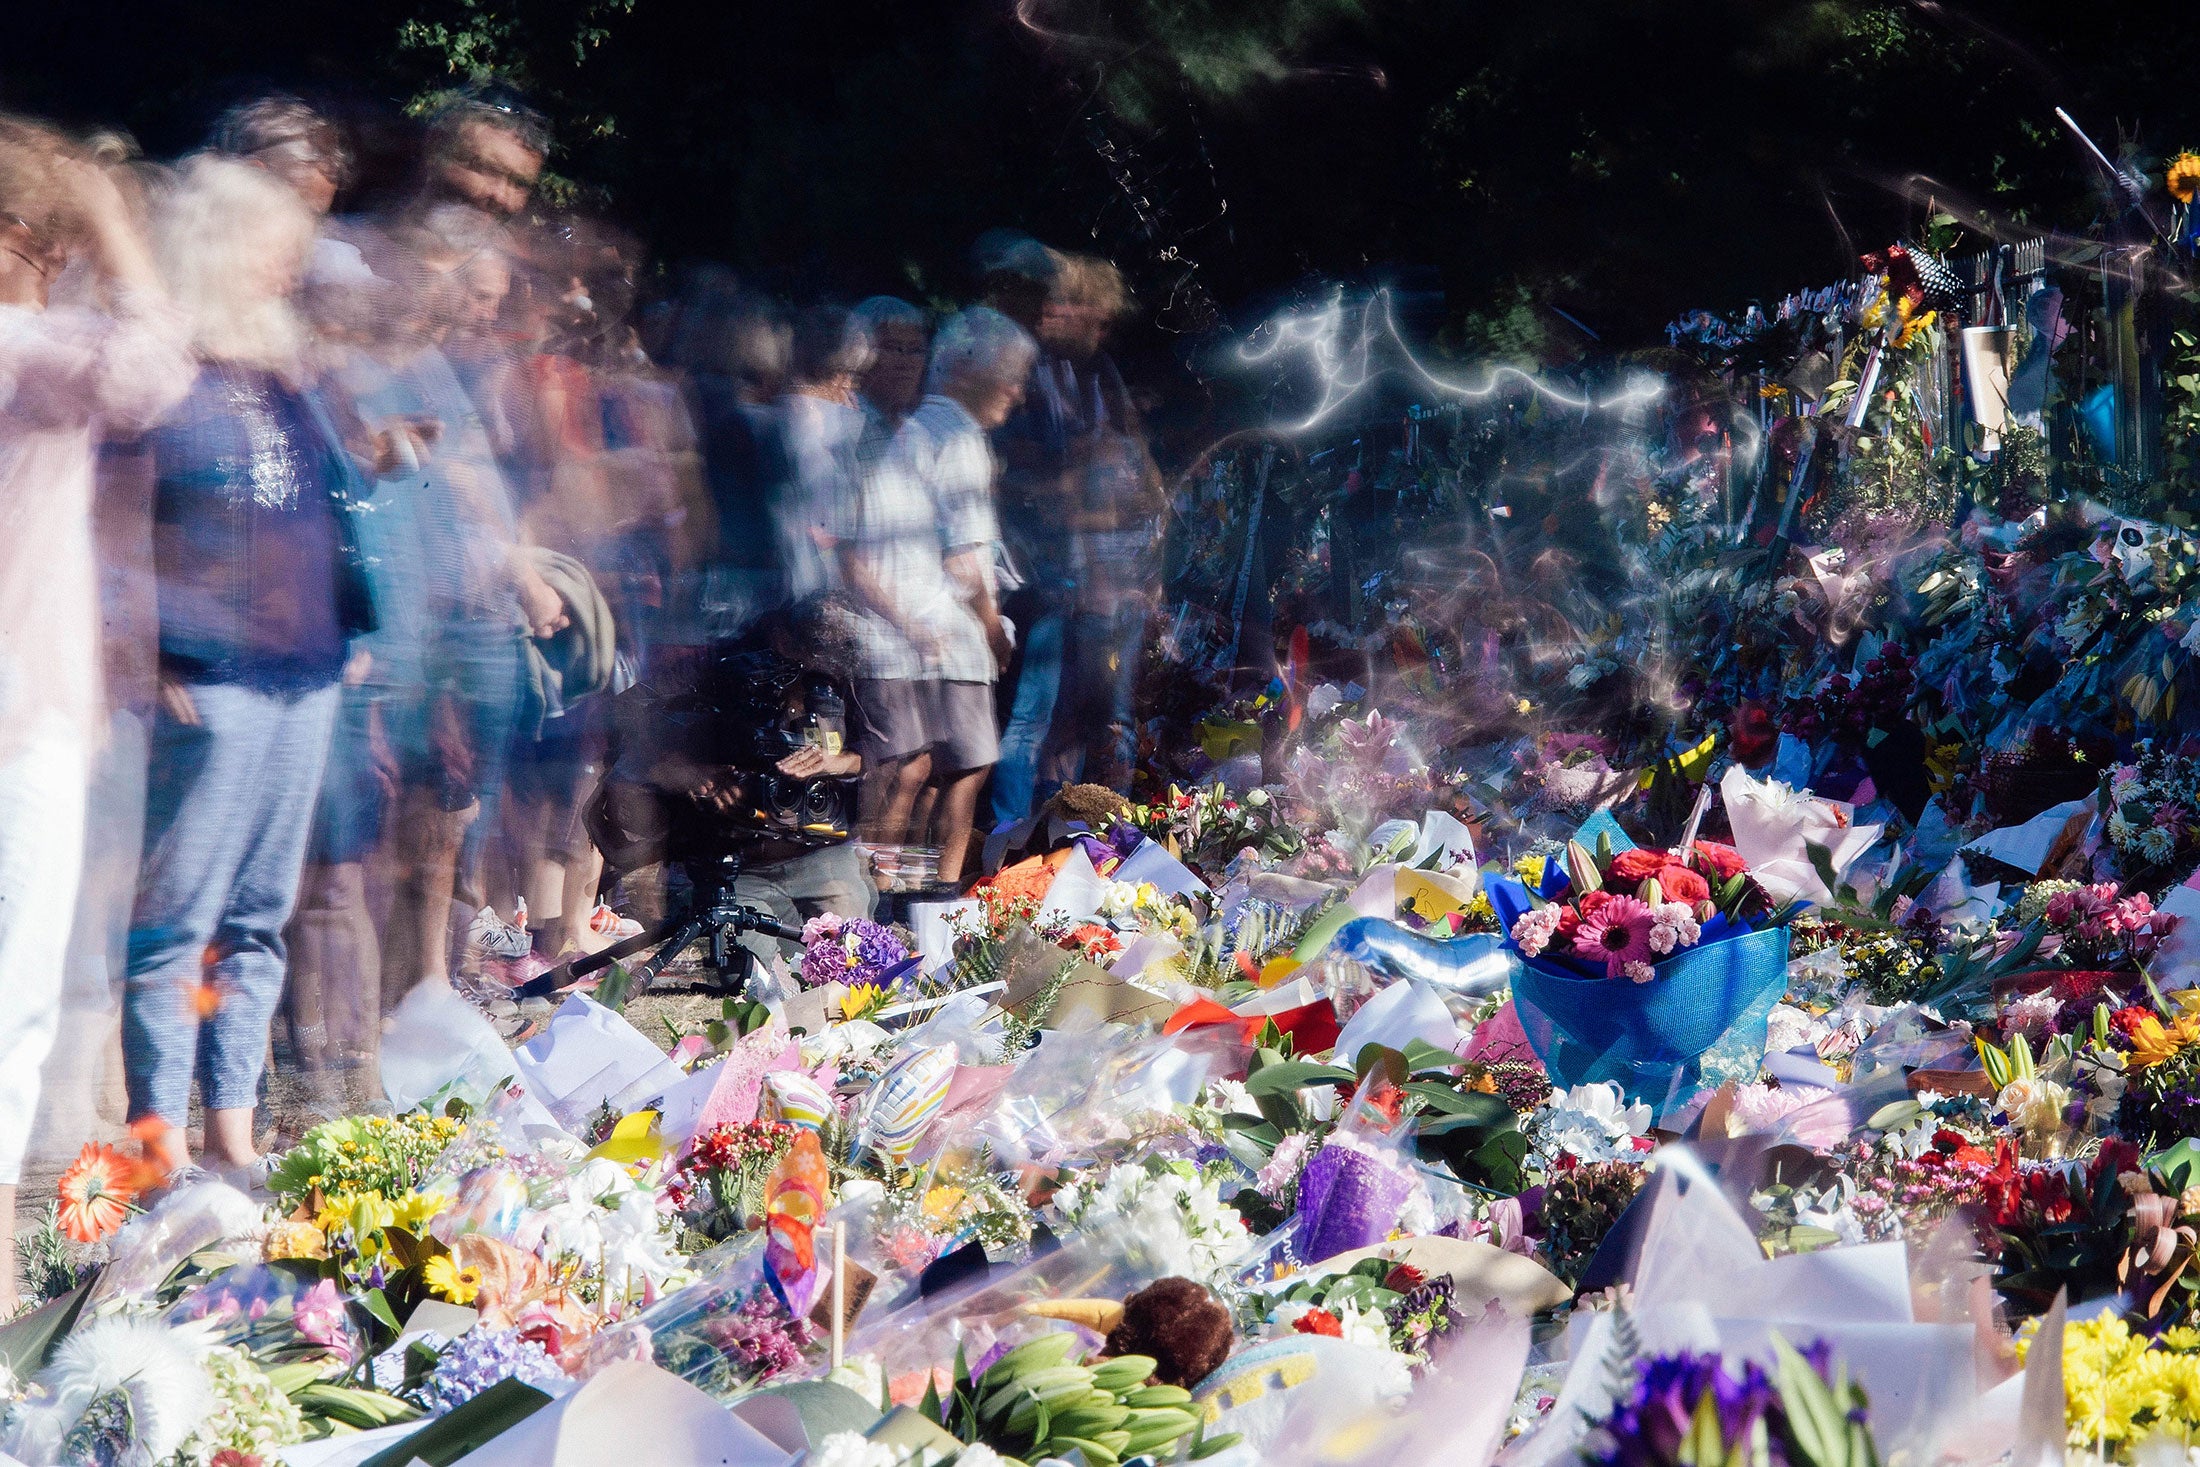 Mourners gathered in front of floral tributes to the New Zealand shooting victims.